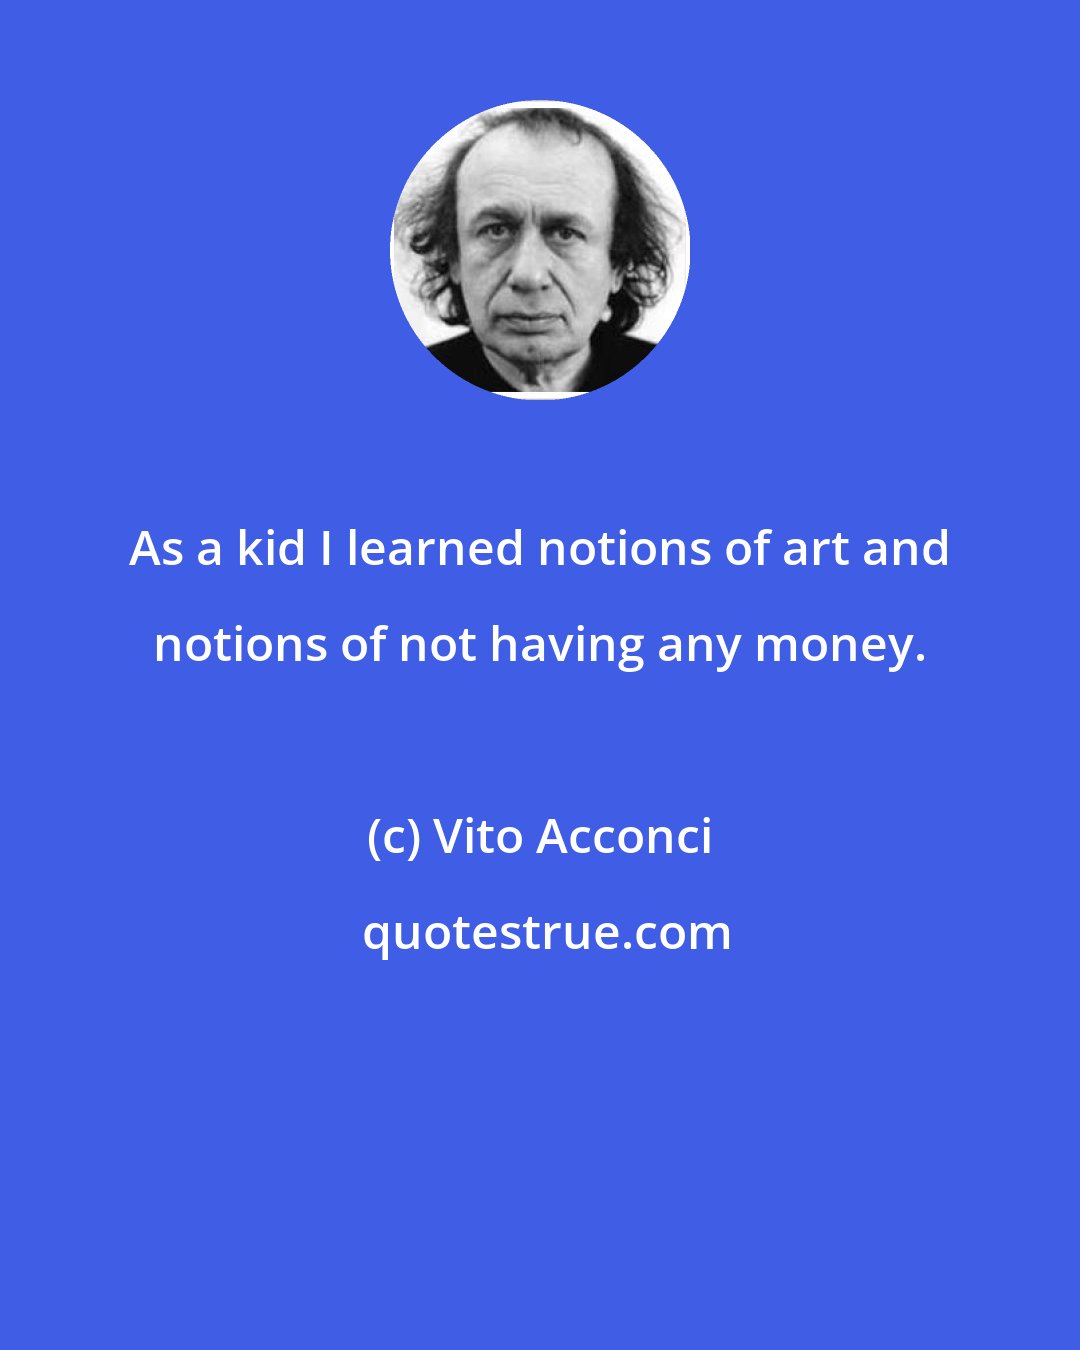 Vito Acconci: As a kid I learned notions of art and notions of not having any money.